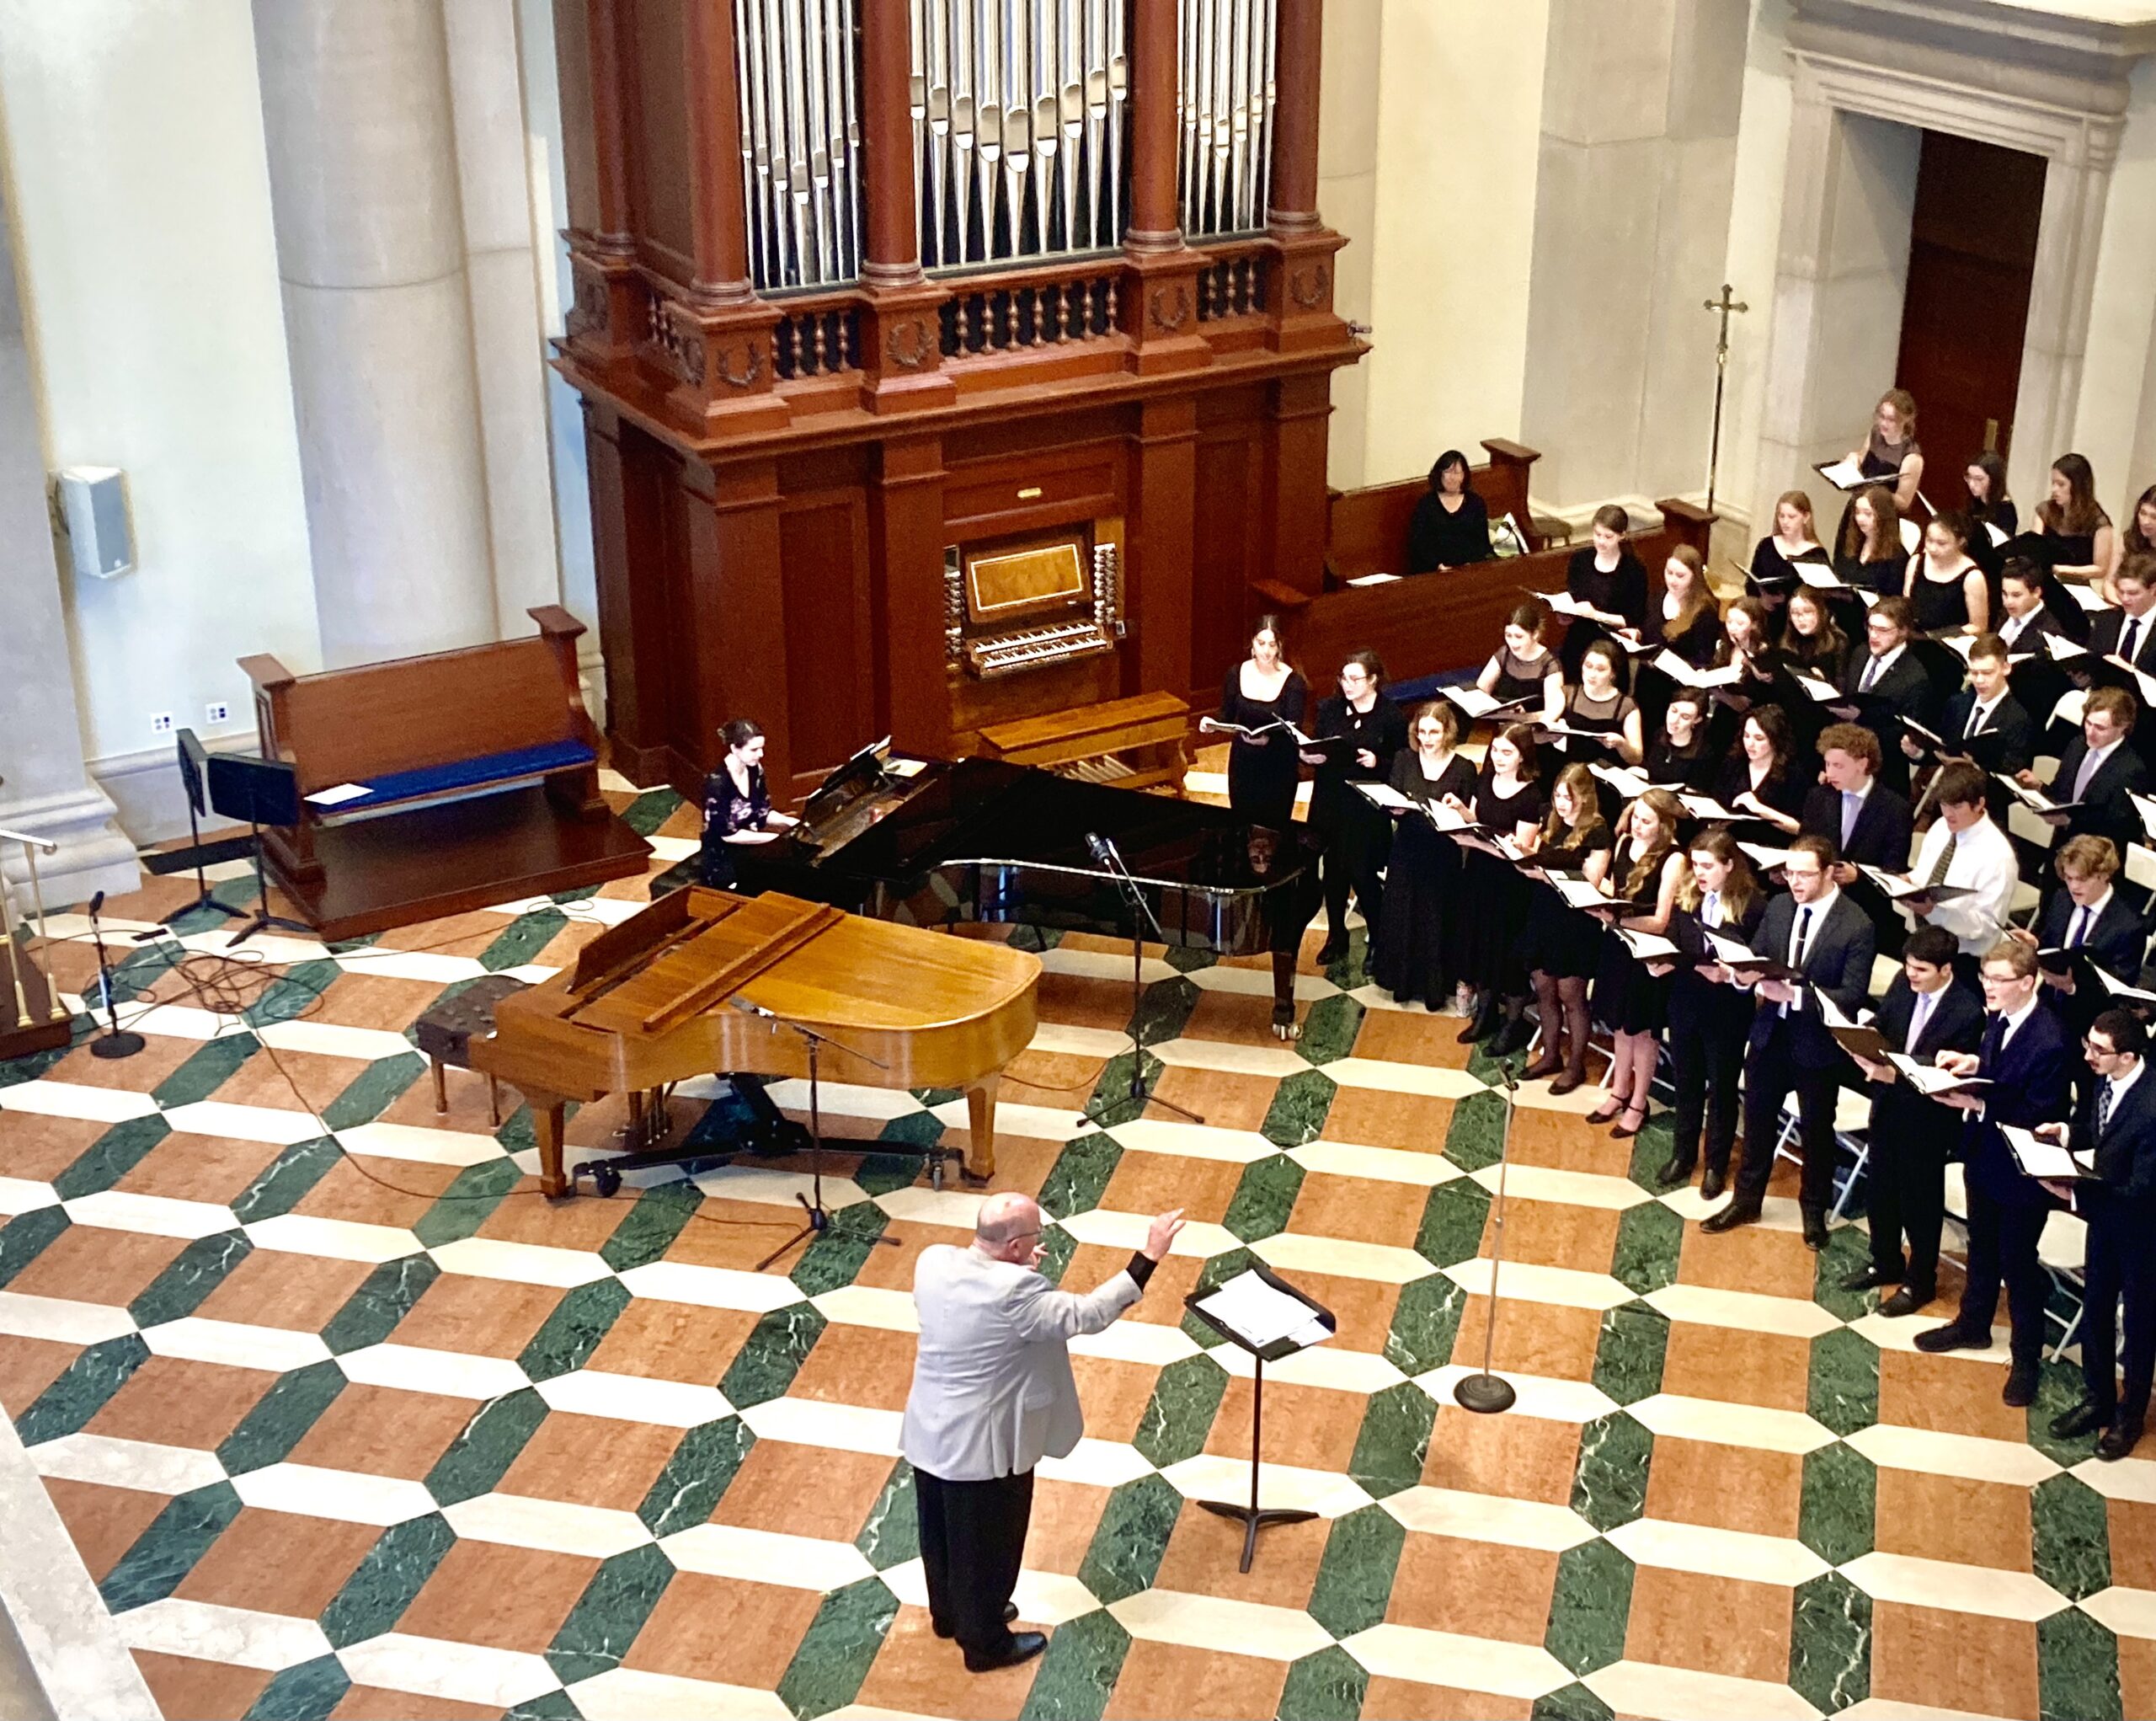 Campus choirs and orchestra join for end-of-the-season concert